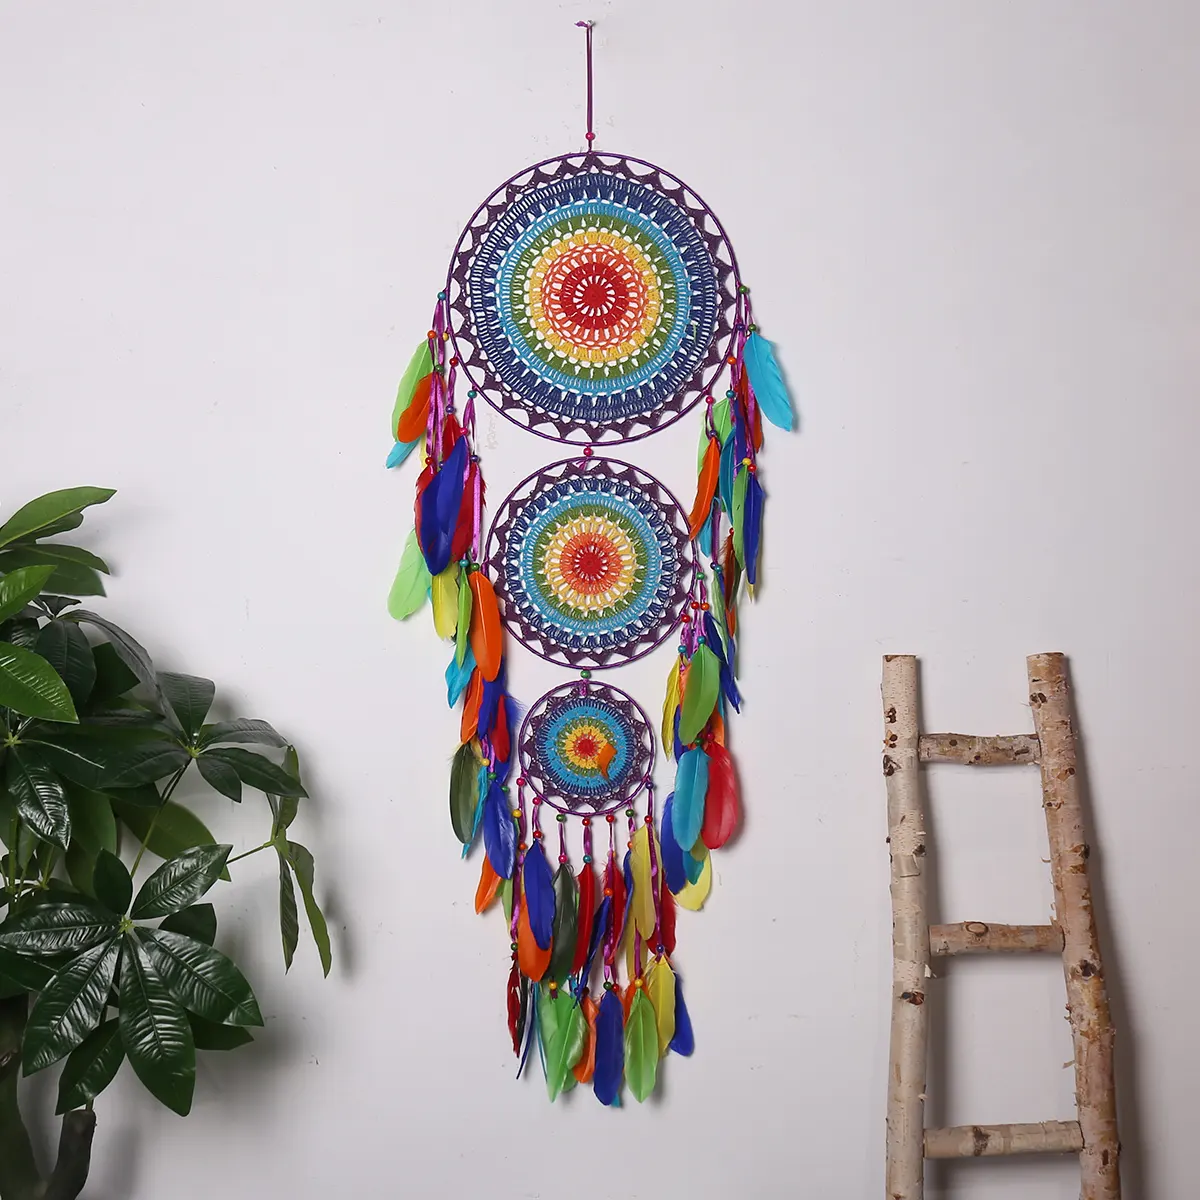 India Design Concentric Circles Three Iron Rings Dreamcatcher with Colorful Feather Woven Lucky Eyes Hanging Decor Bedroom